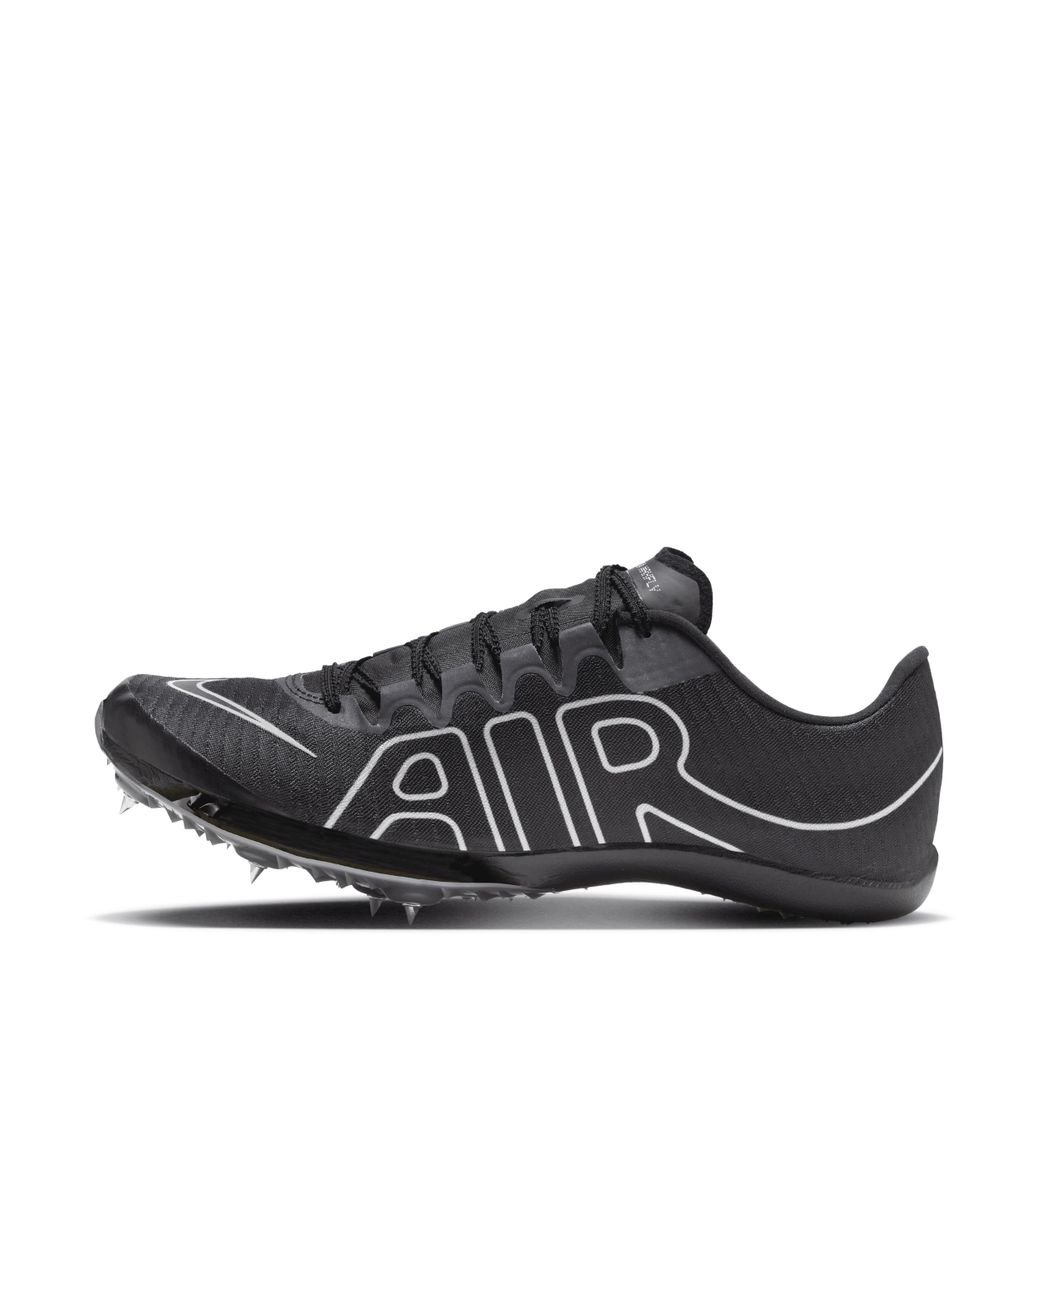 Nike Air Zoom Maxfly More Uptempo Track & Field Sprinting Spikes In